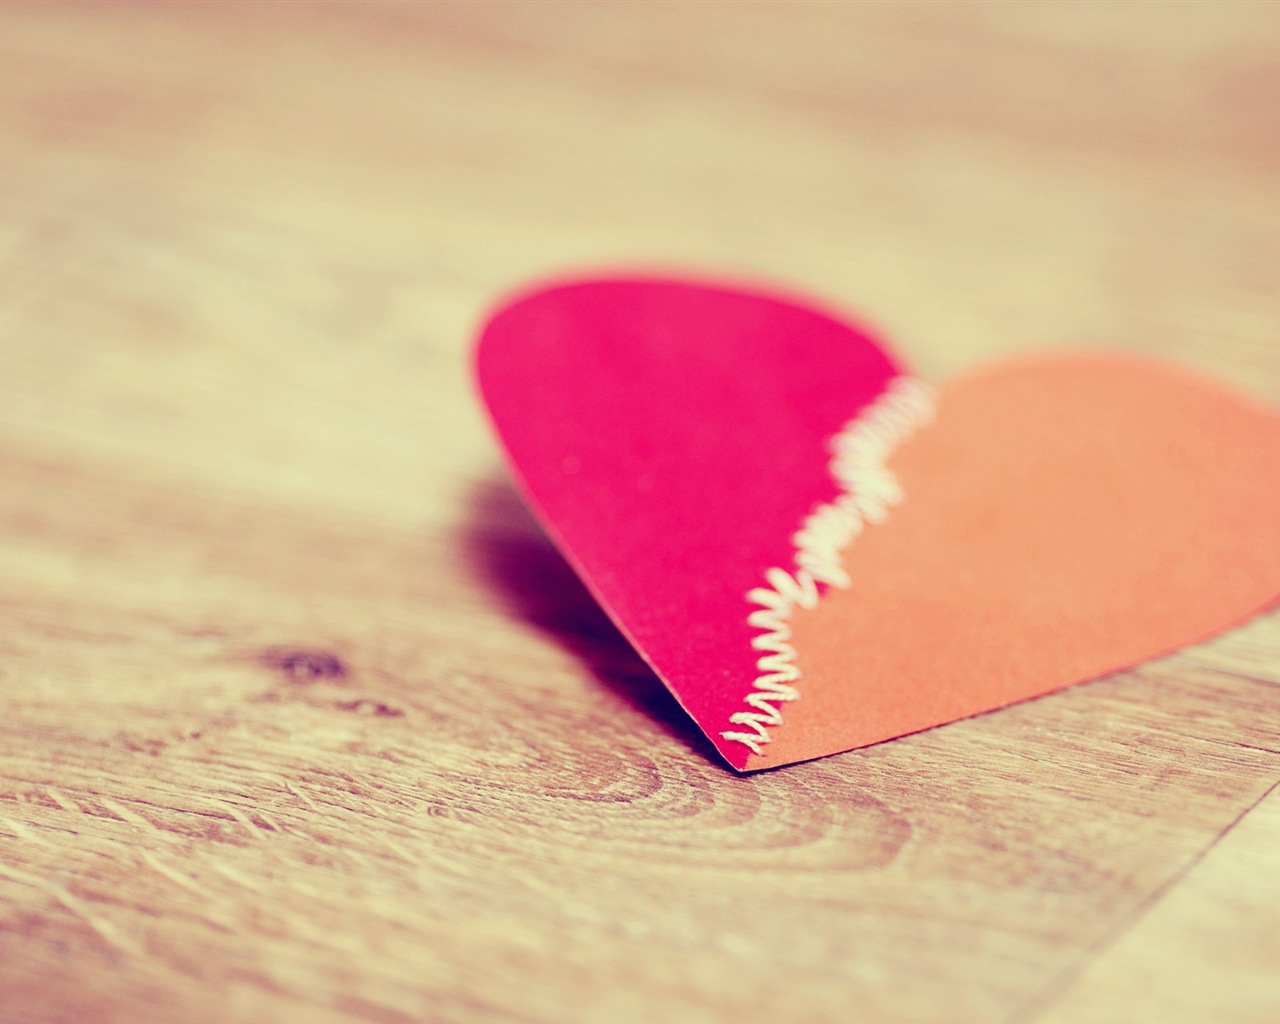 The theme of love, creative heart-shaped HD wallpapers #5 - 1280x1024